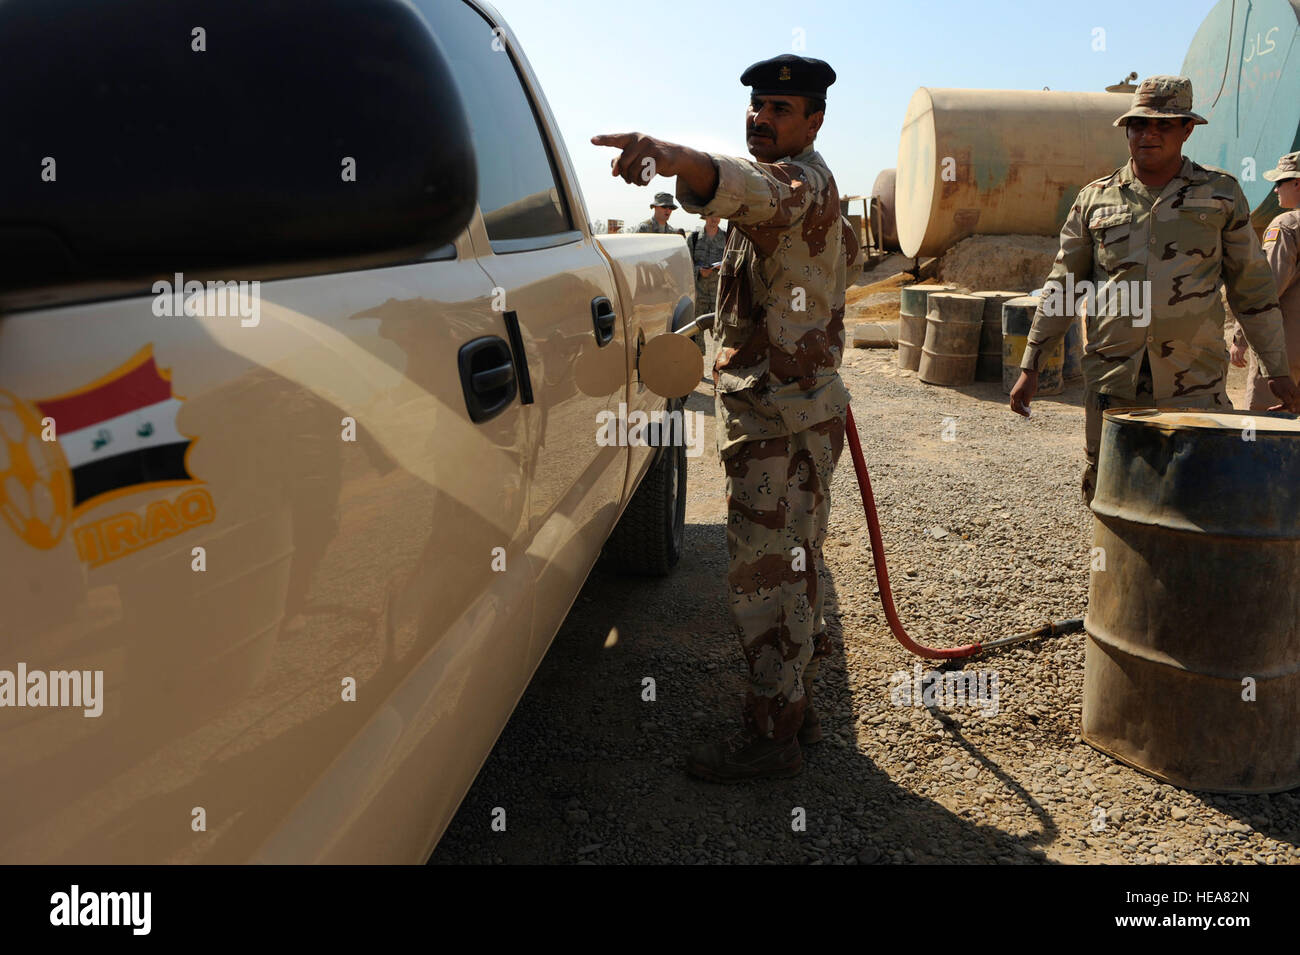 Iraqi soldiers refuel their vehicles at Camp Taji, near Baghdad, Iraq, July 11. The Iraqi fuels depot is run exclusively by the Iraqi army with some assistance from an American Airman assigned to the Logistics Military Advisor Team. Stock Photo